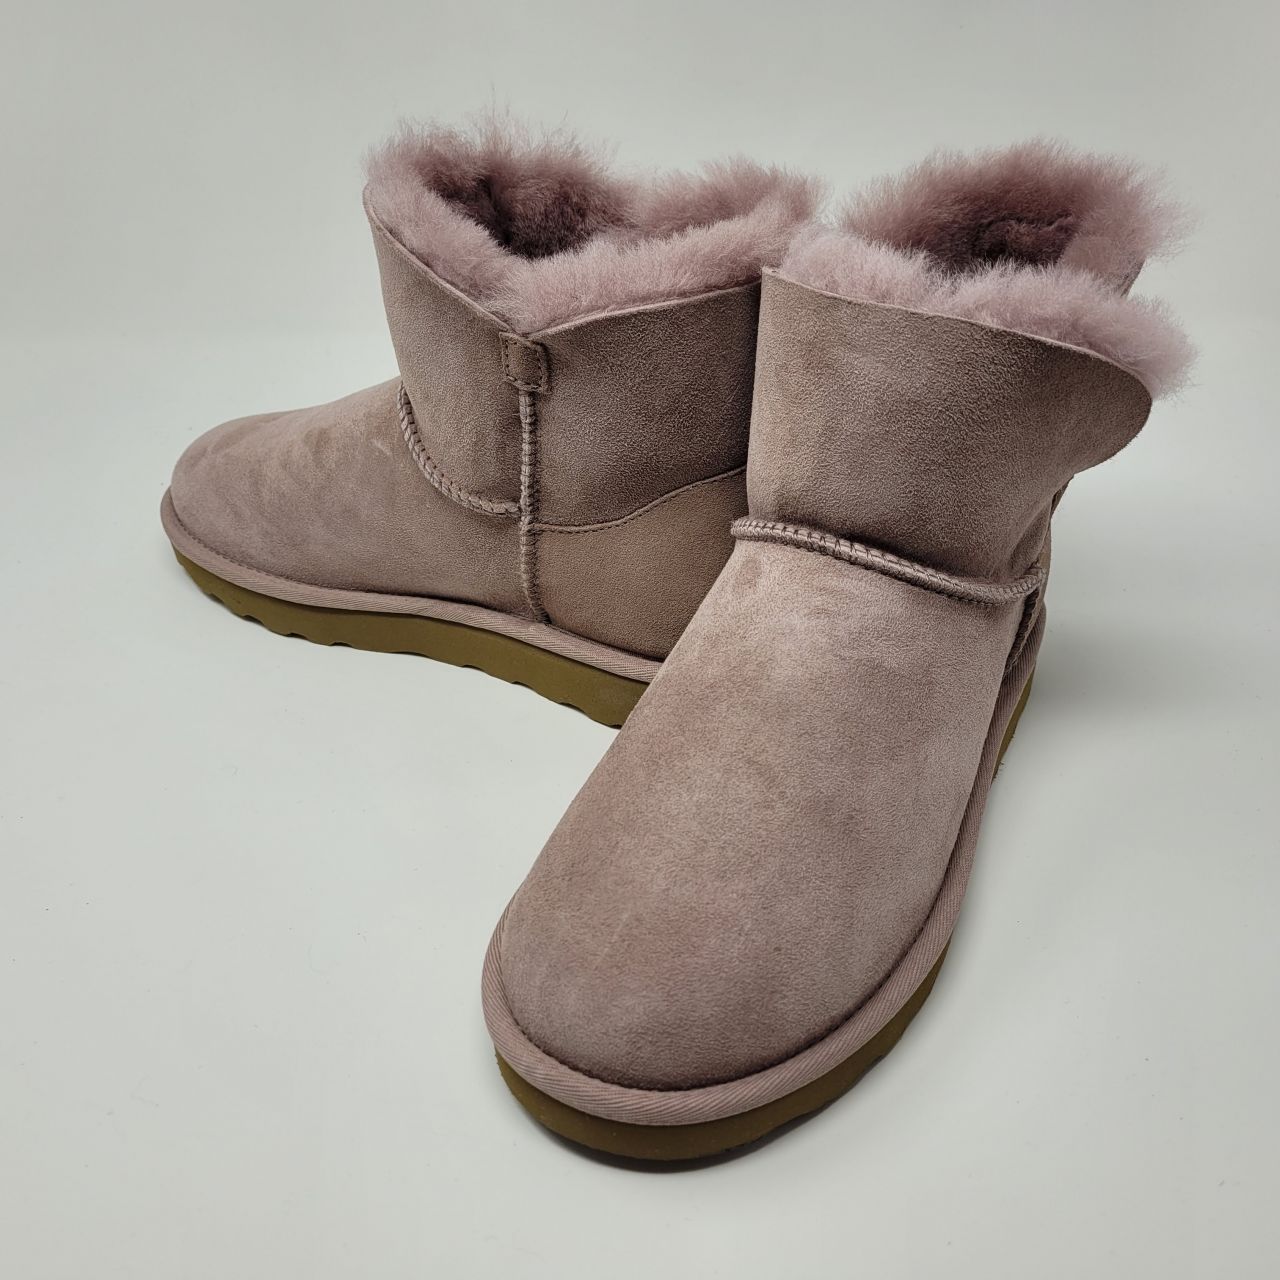 Ladies' Extra Short Sheepskin Boots in Fawn: Genuine Sheep Skin from ...